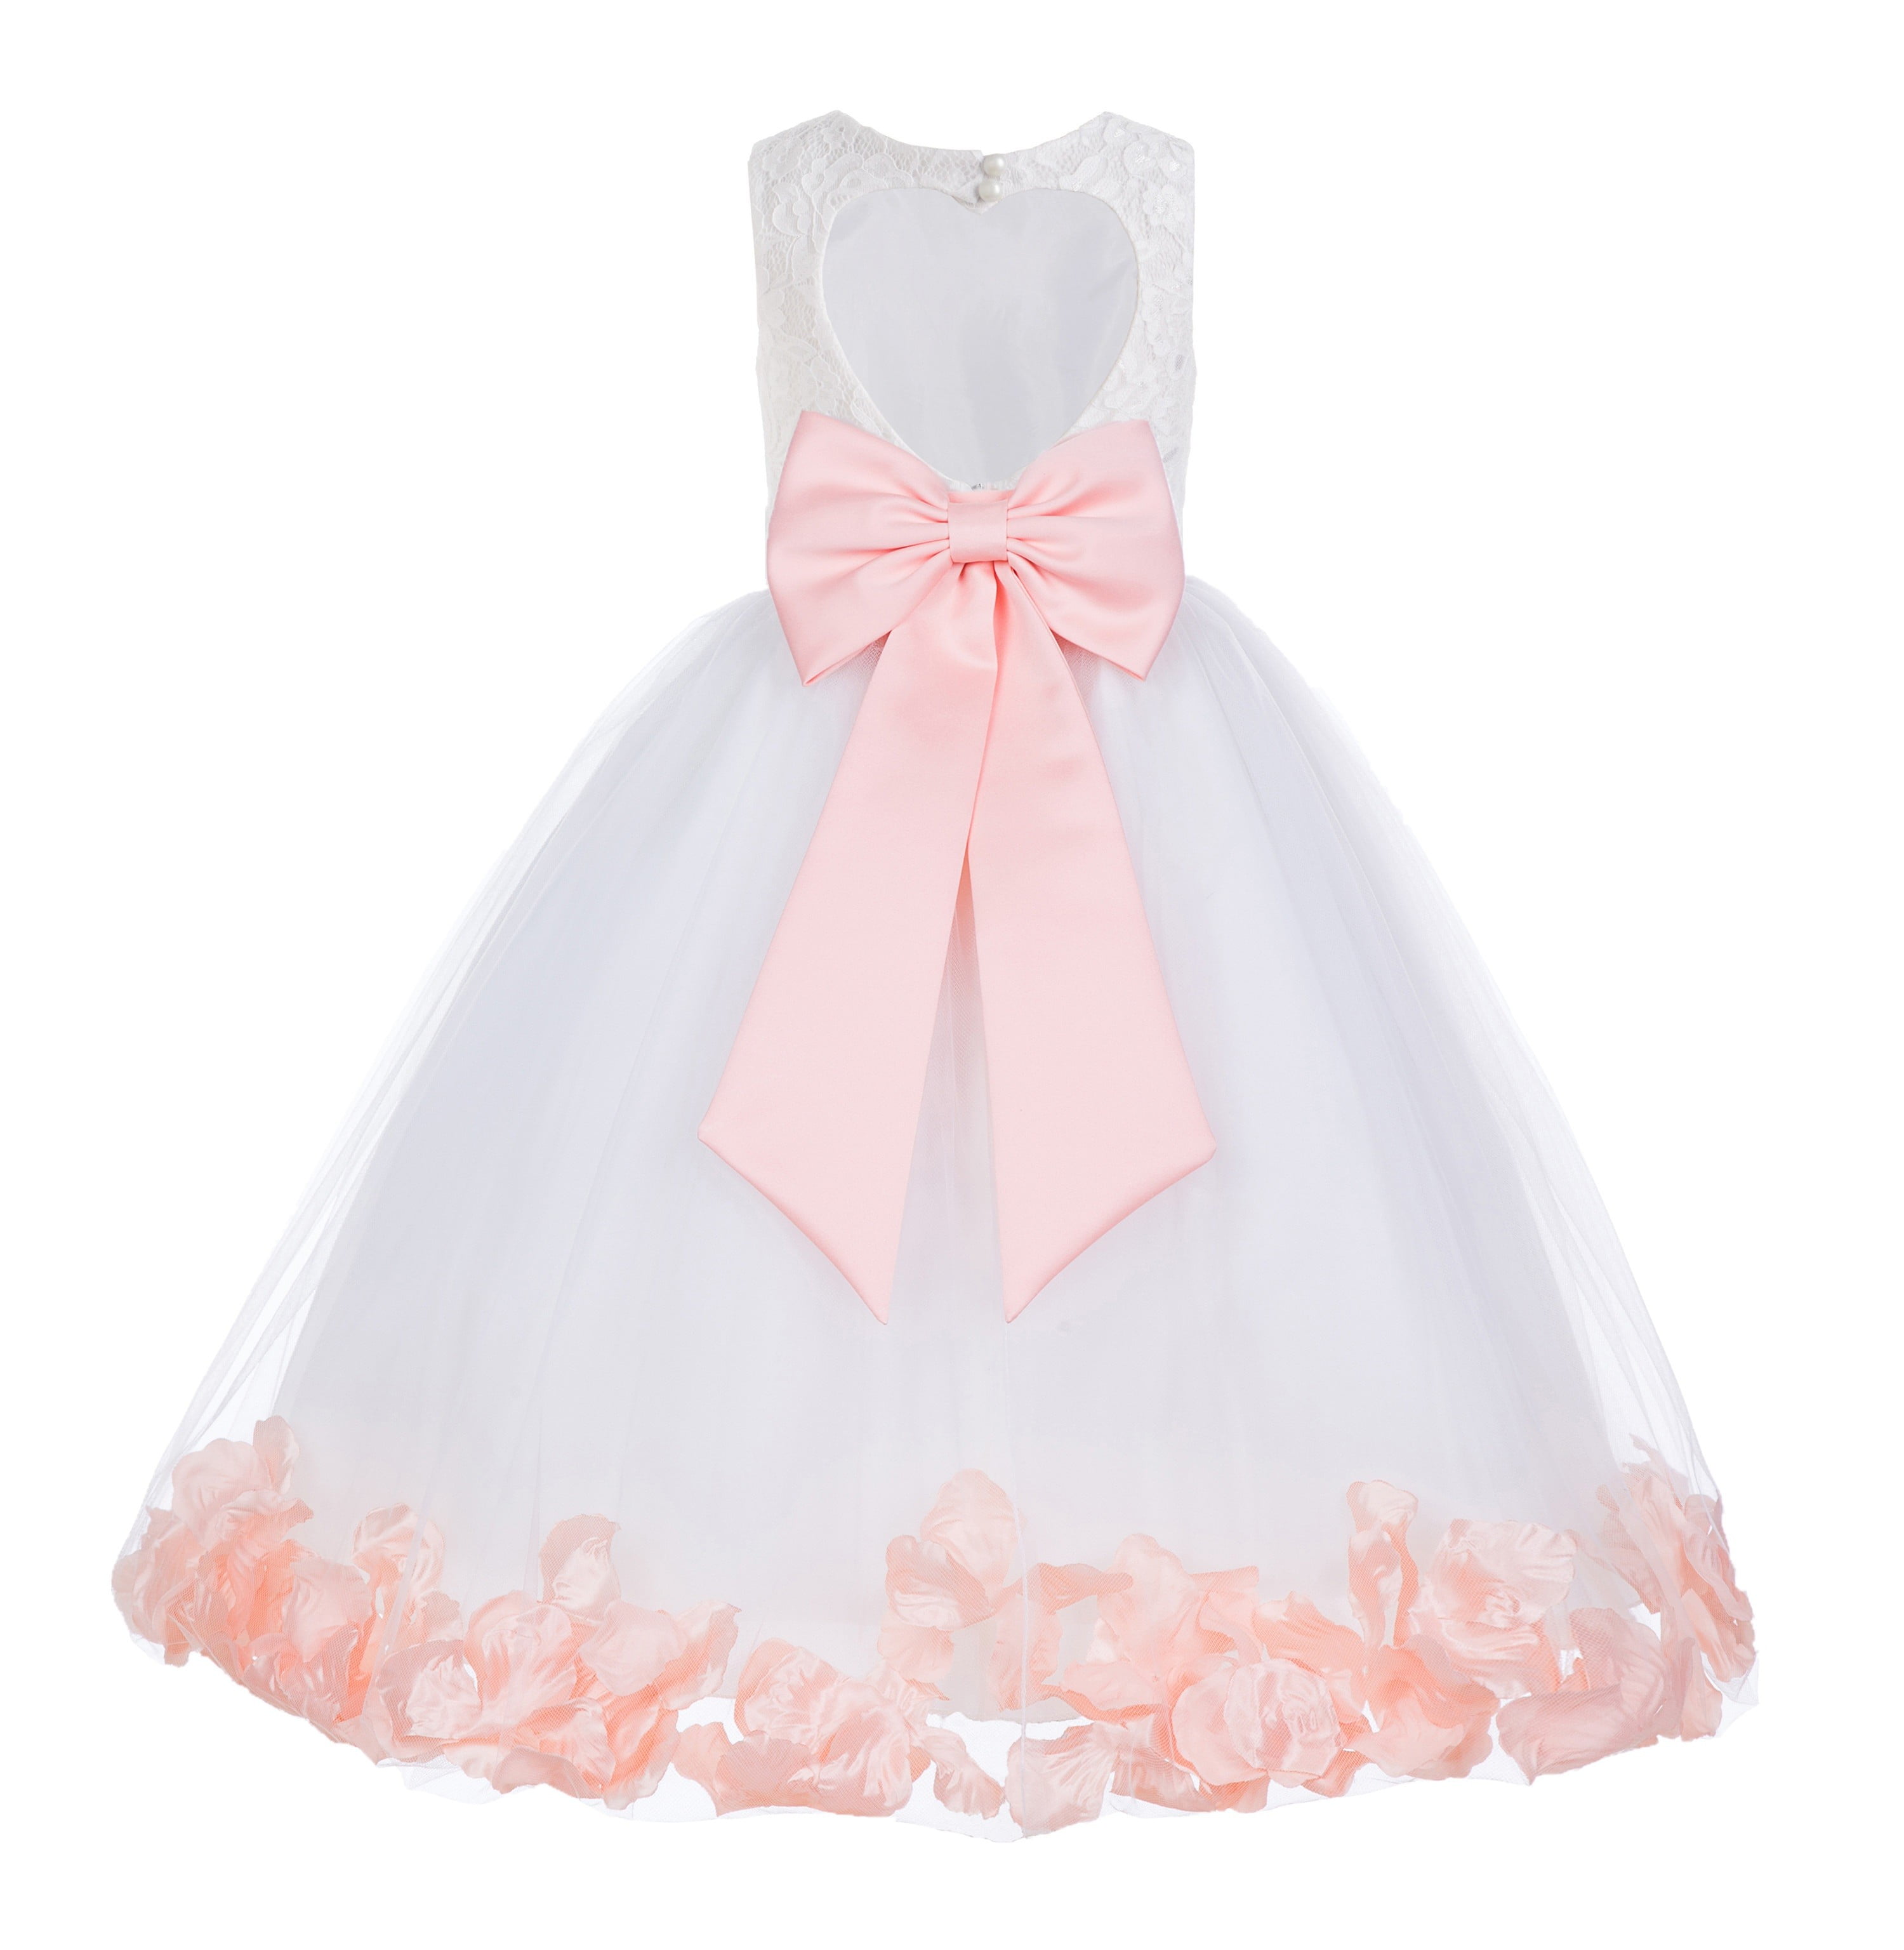 Rose Petals Lace Heart Cutout Ivory Flower Girl Dress Special Occasion Dresses 